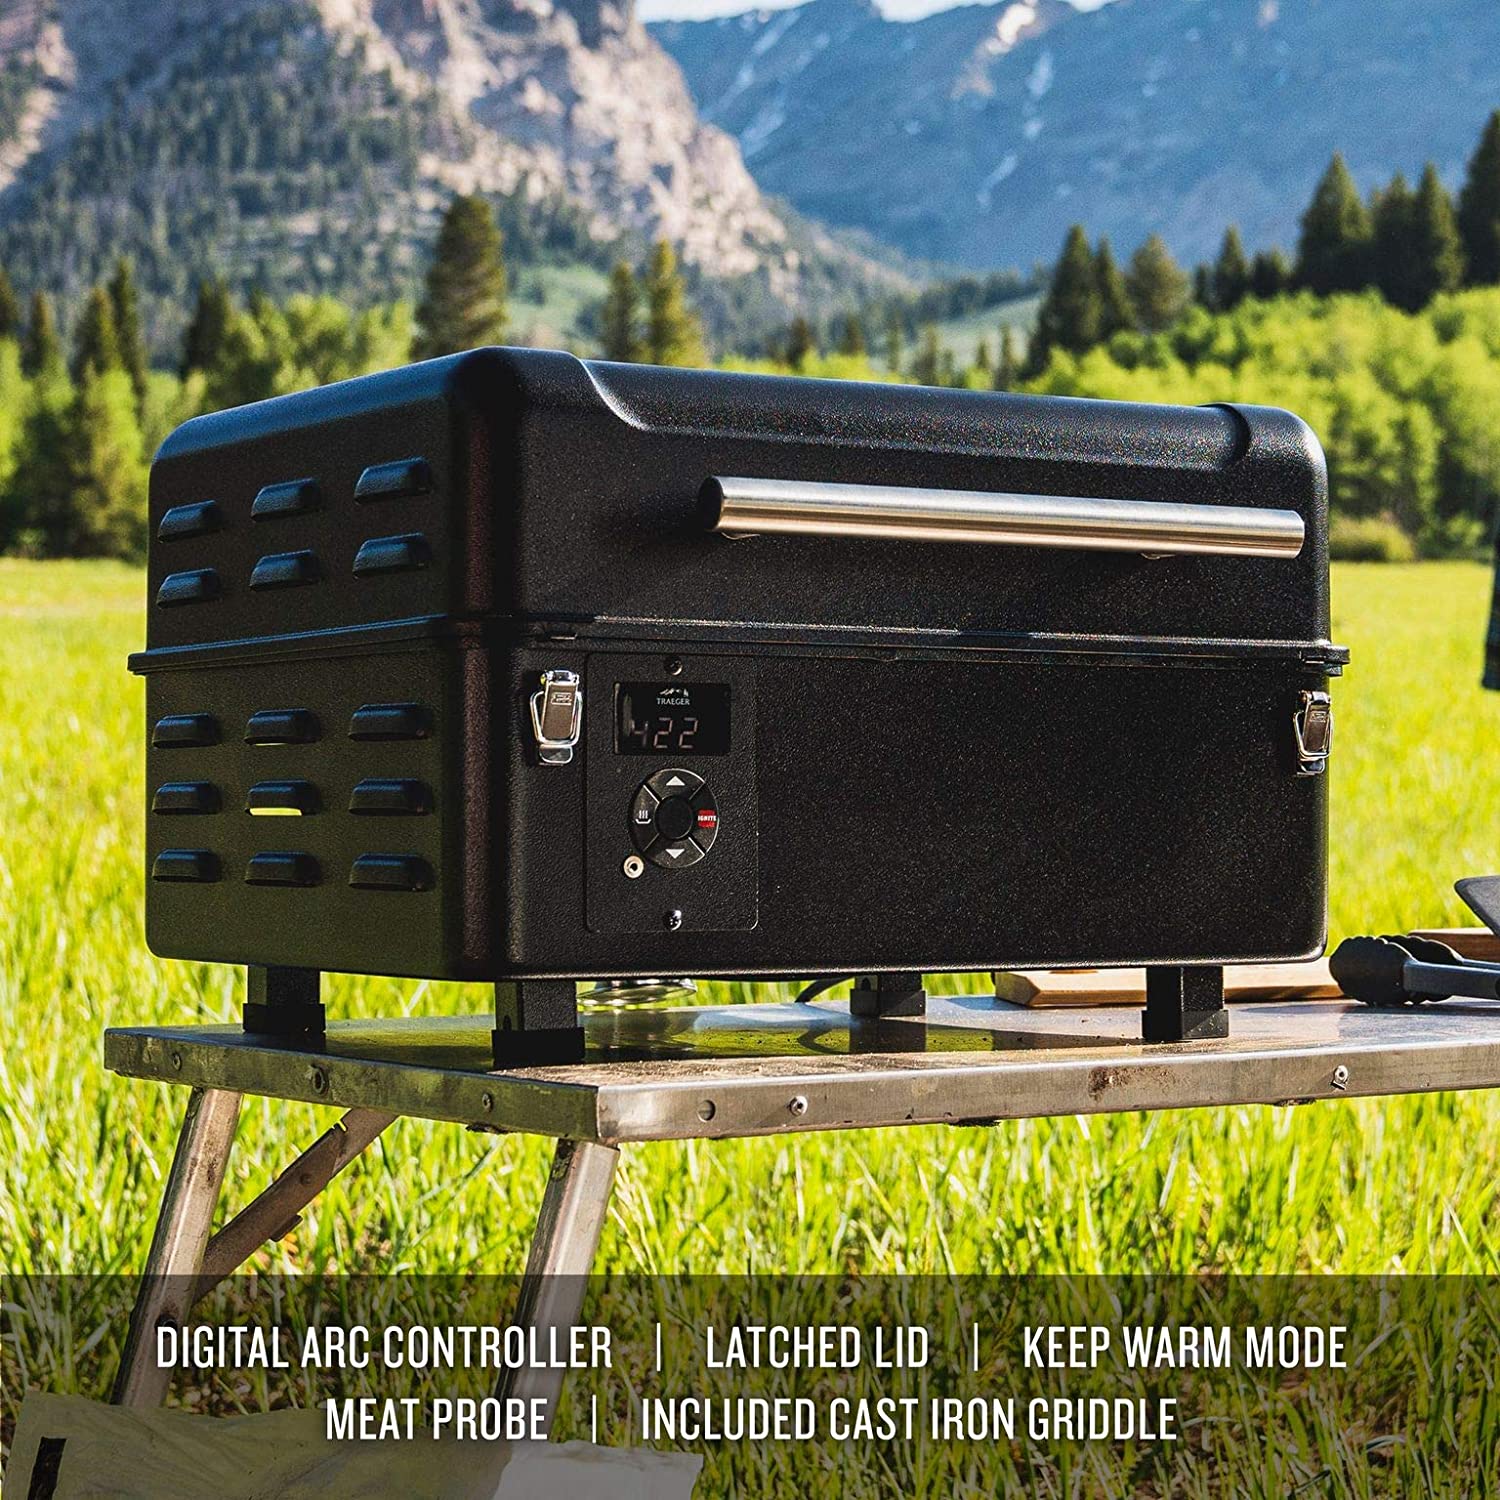 Traeger Ranger Portable Pellet Grill Lifestyle on the Top of the Table